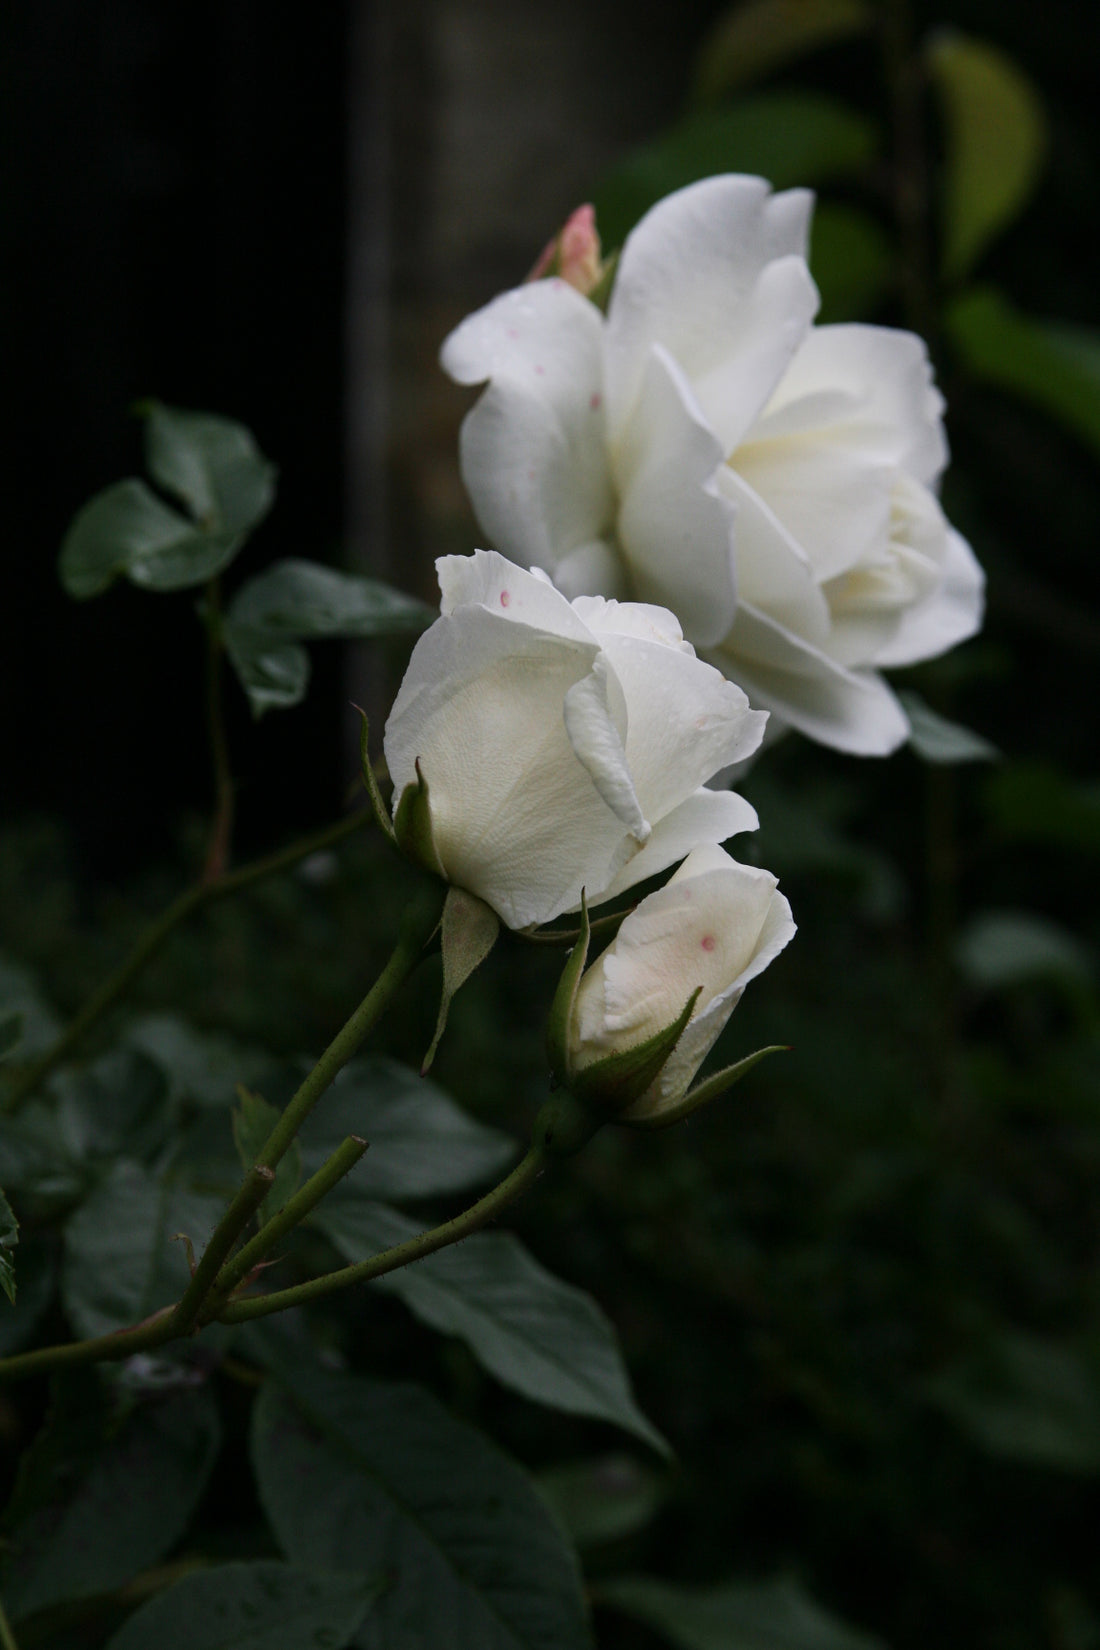 The White Rose of Yorkshire